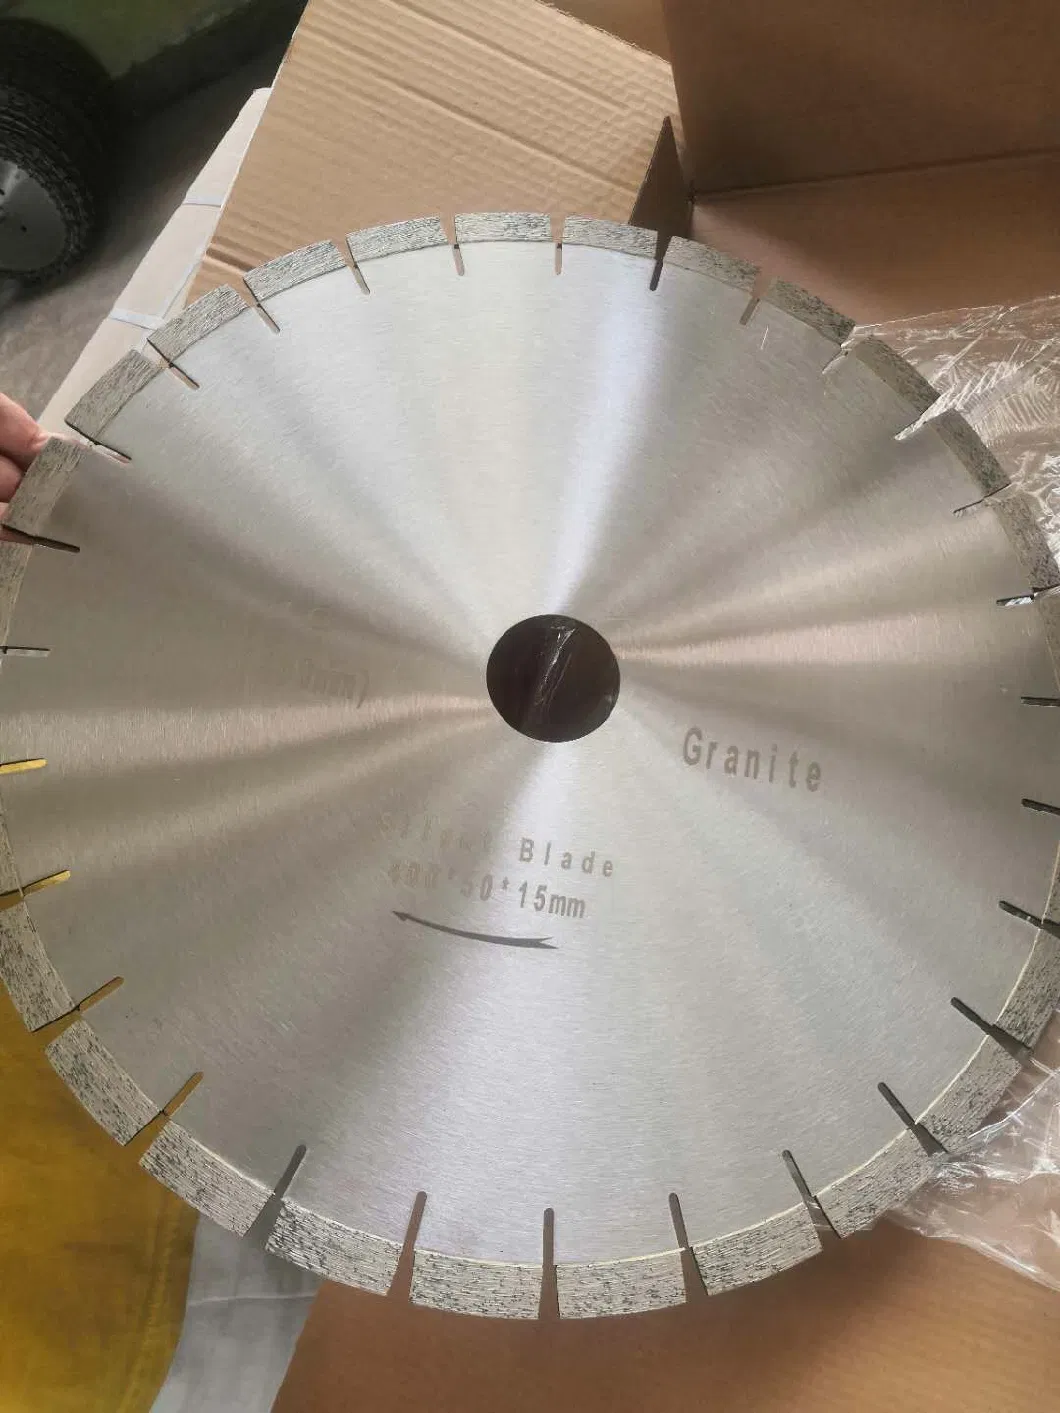 Tungsten Carbide Tipped Sliding Table Saw Blades Wood Cutting Disc